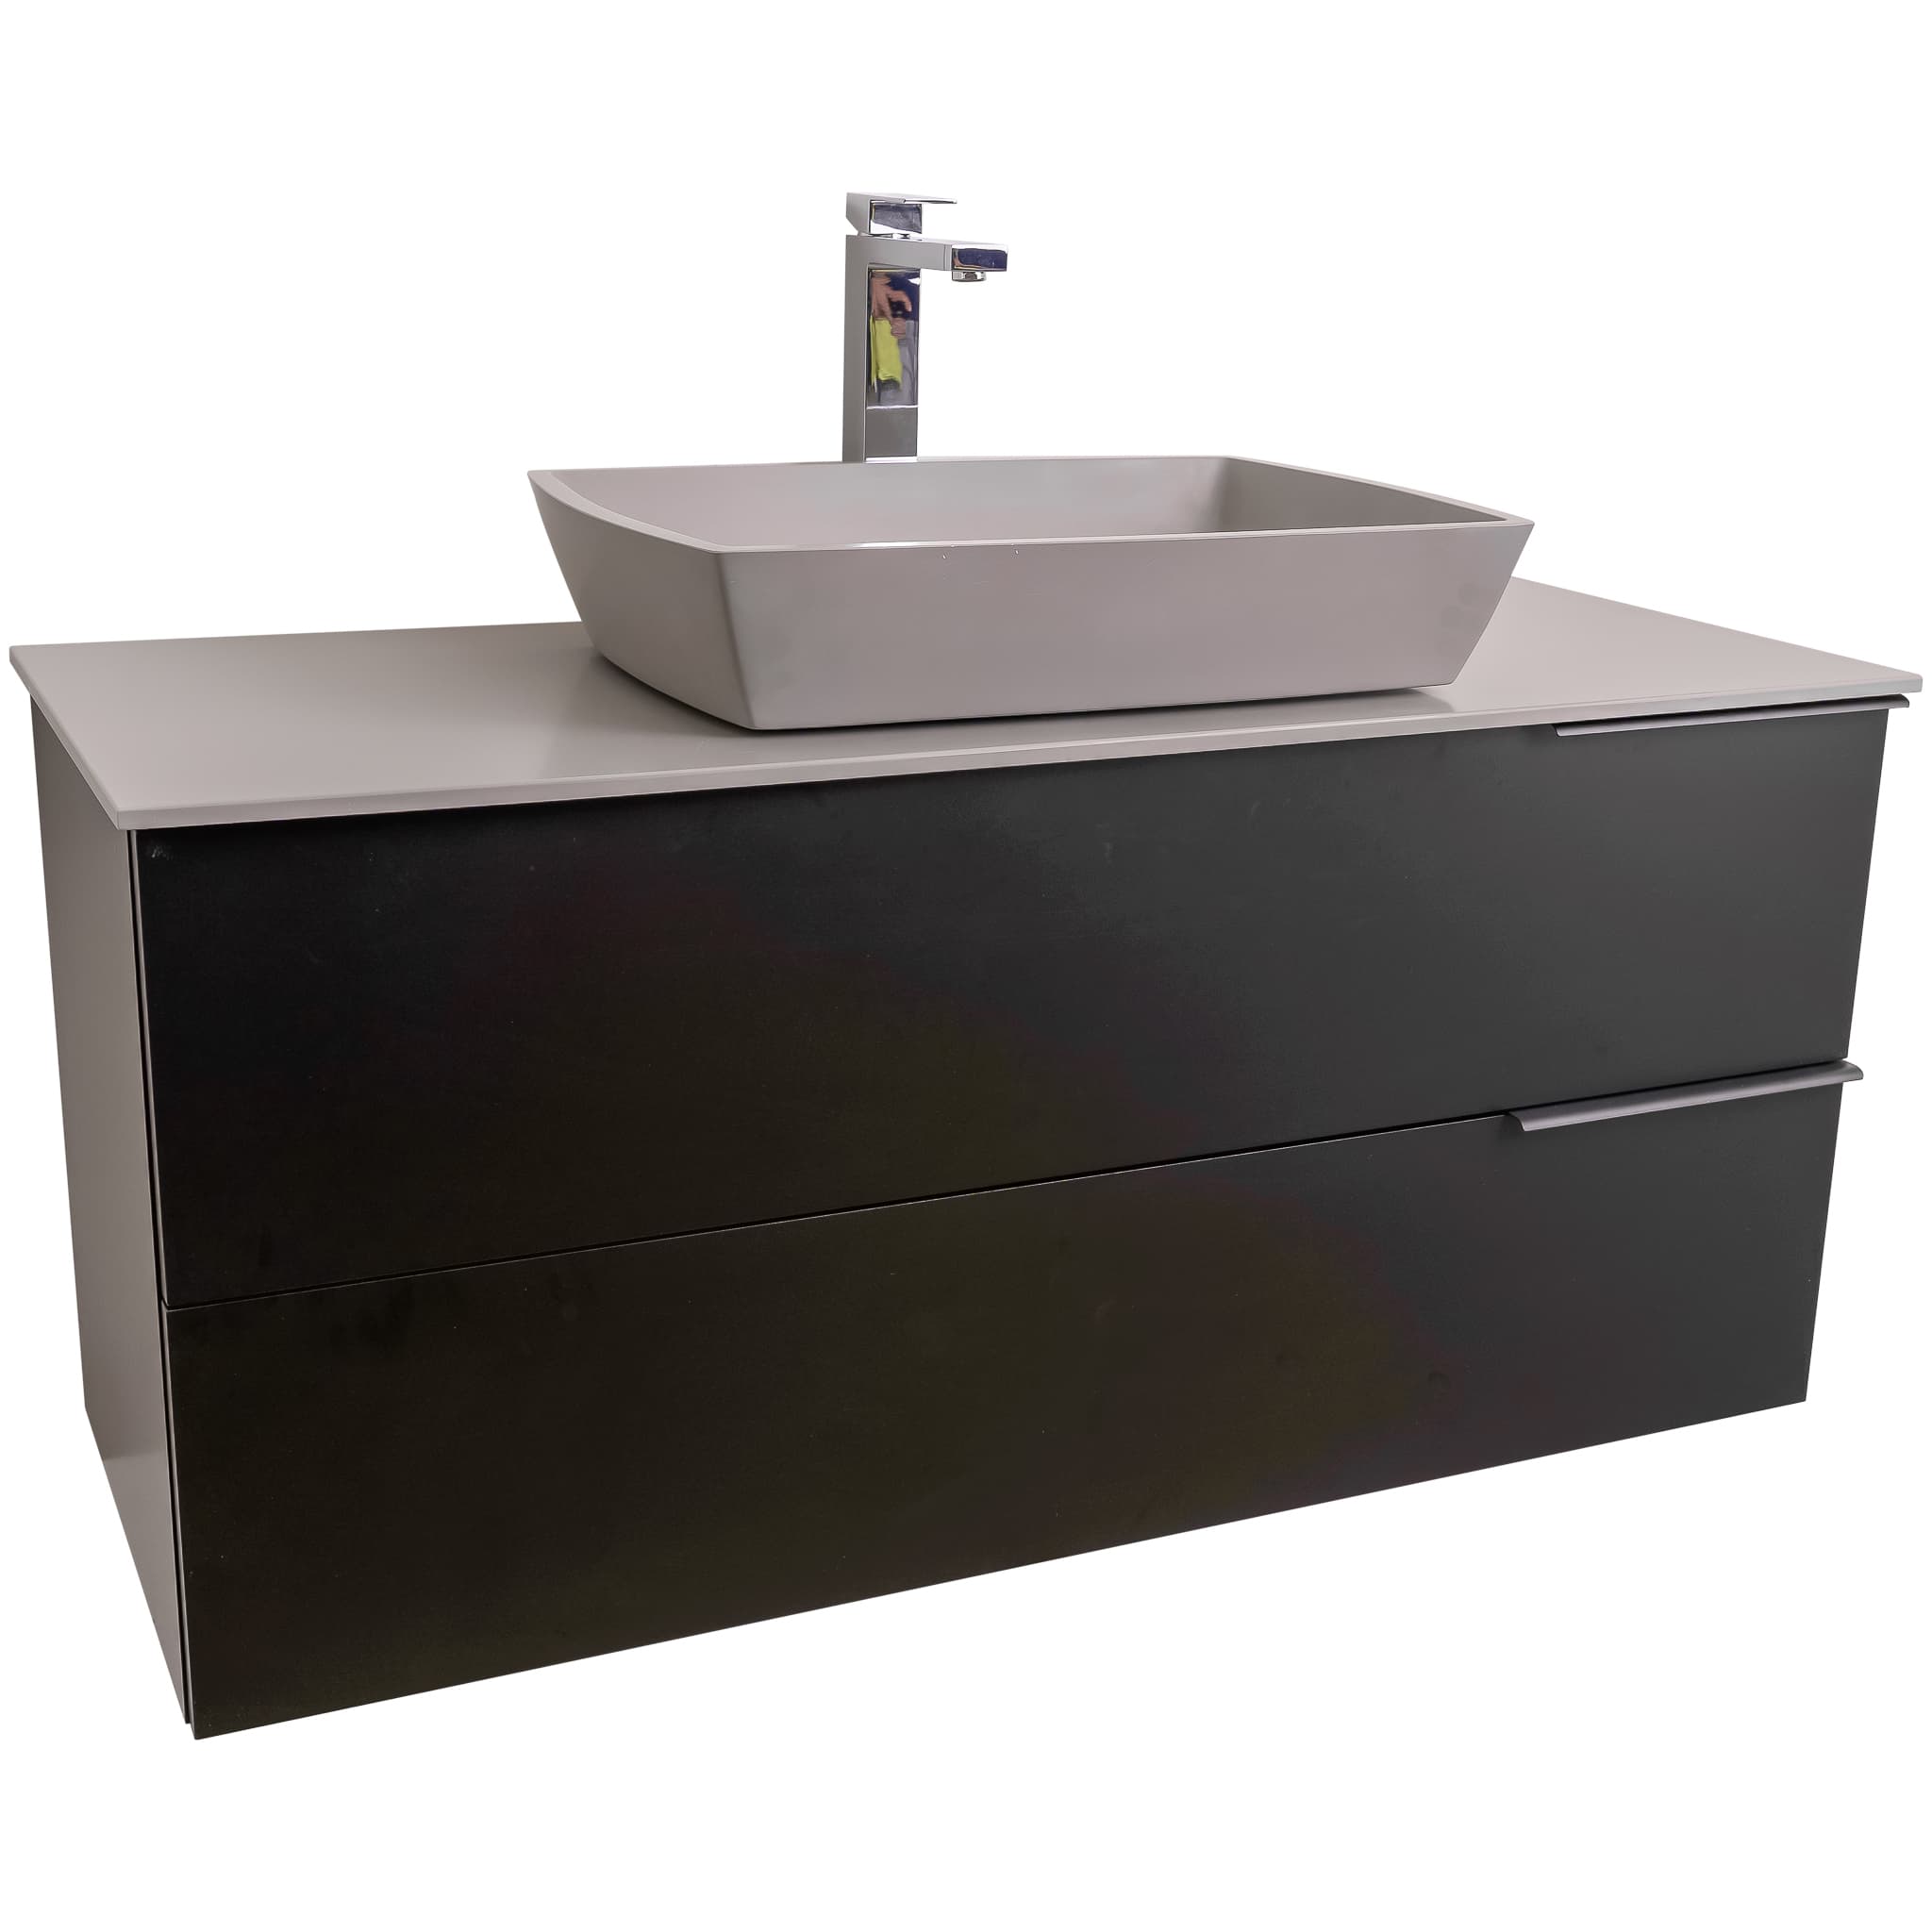 Mallorca 47.5 Matte Black Cabinet, Solid Surface Flat Grey Counter And Square Solid Surface Grey Basin 1316, Wall Mounted Modern Vanity Set